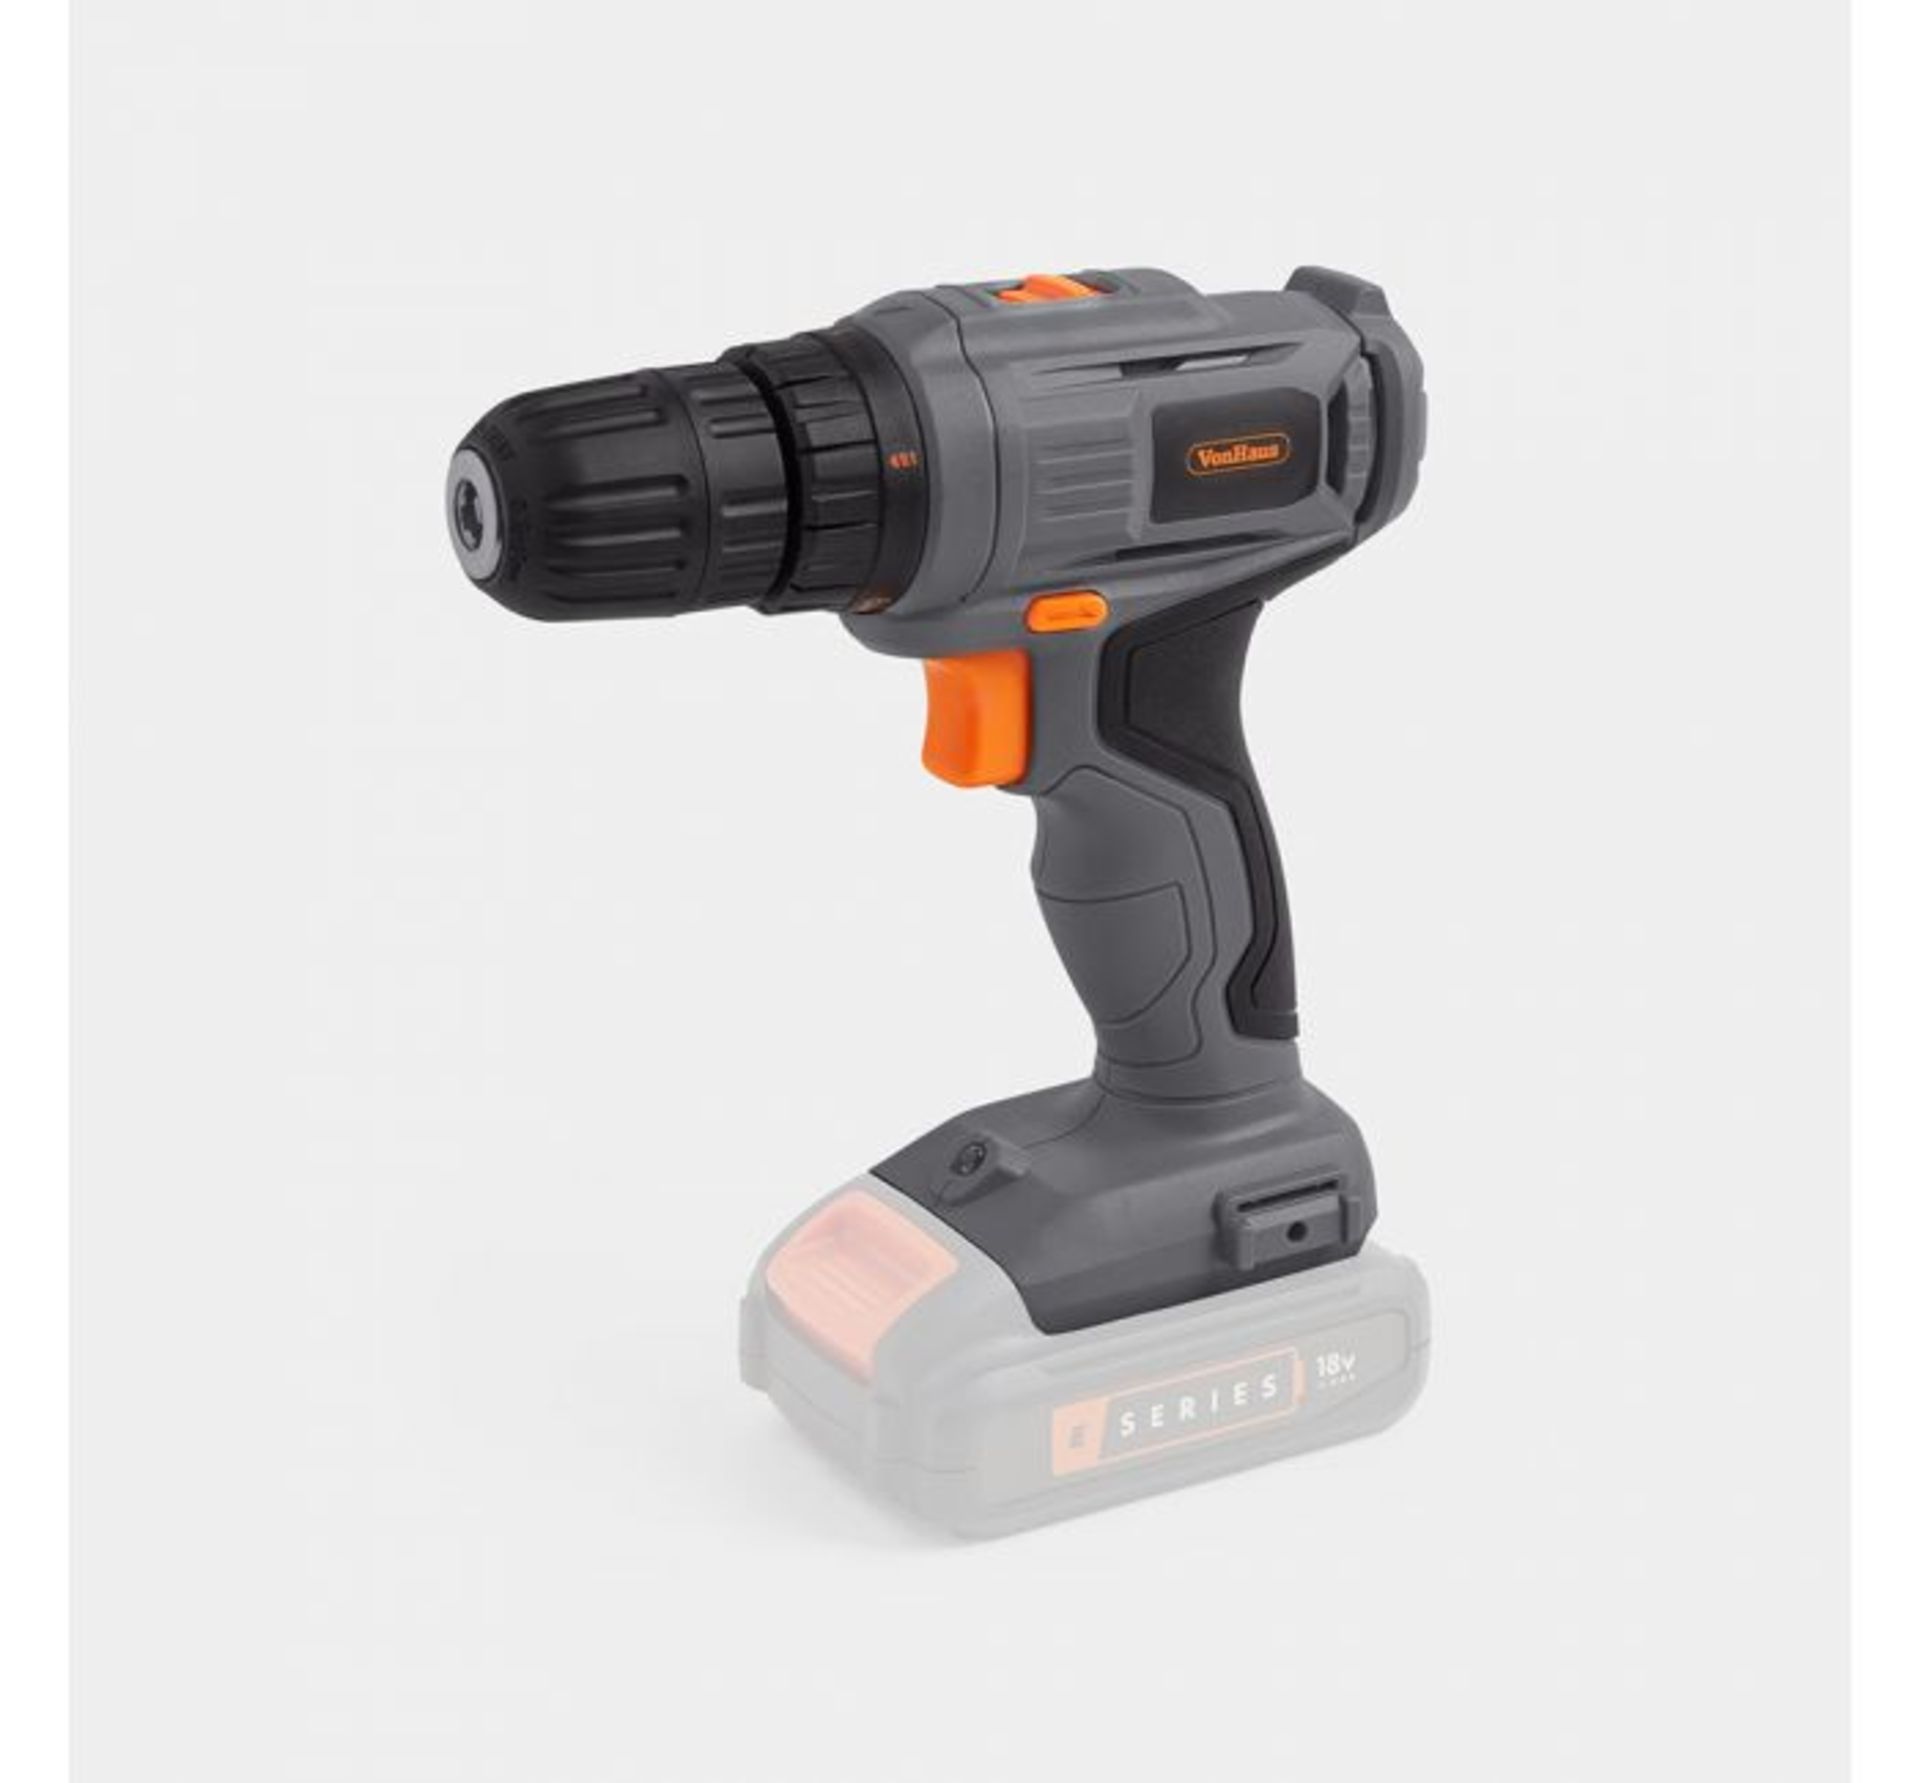 (JH51) E-Series 18V Cordless Drill Driver Drill up to 10mm (metal) & 20mm (wood) 30NM torqu... - Image 2 of 2